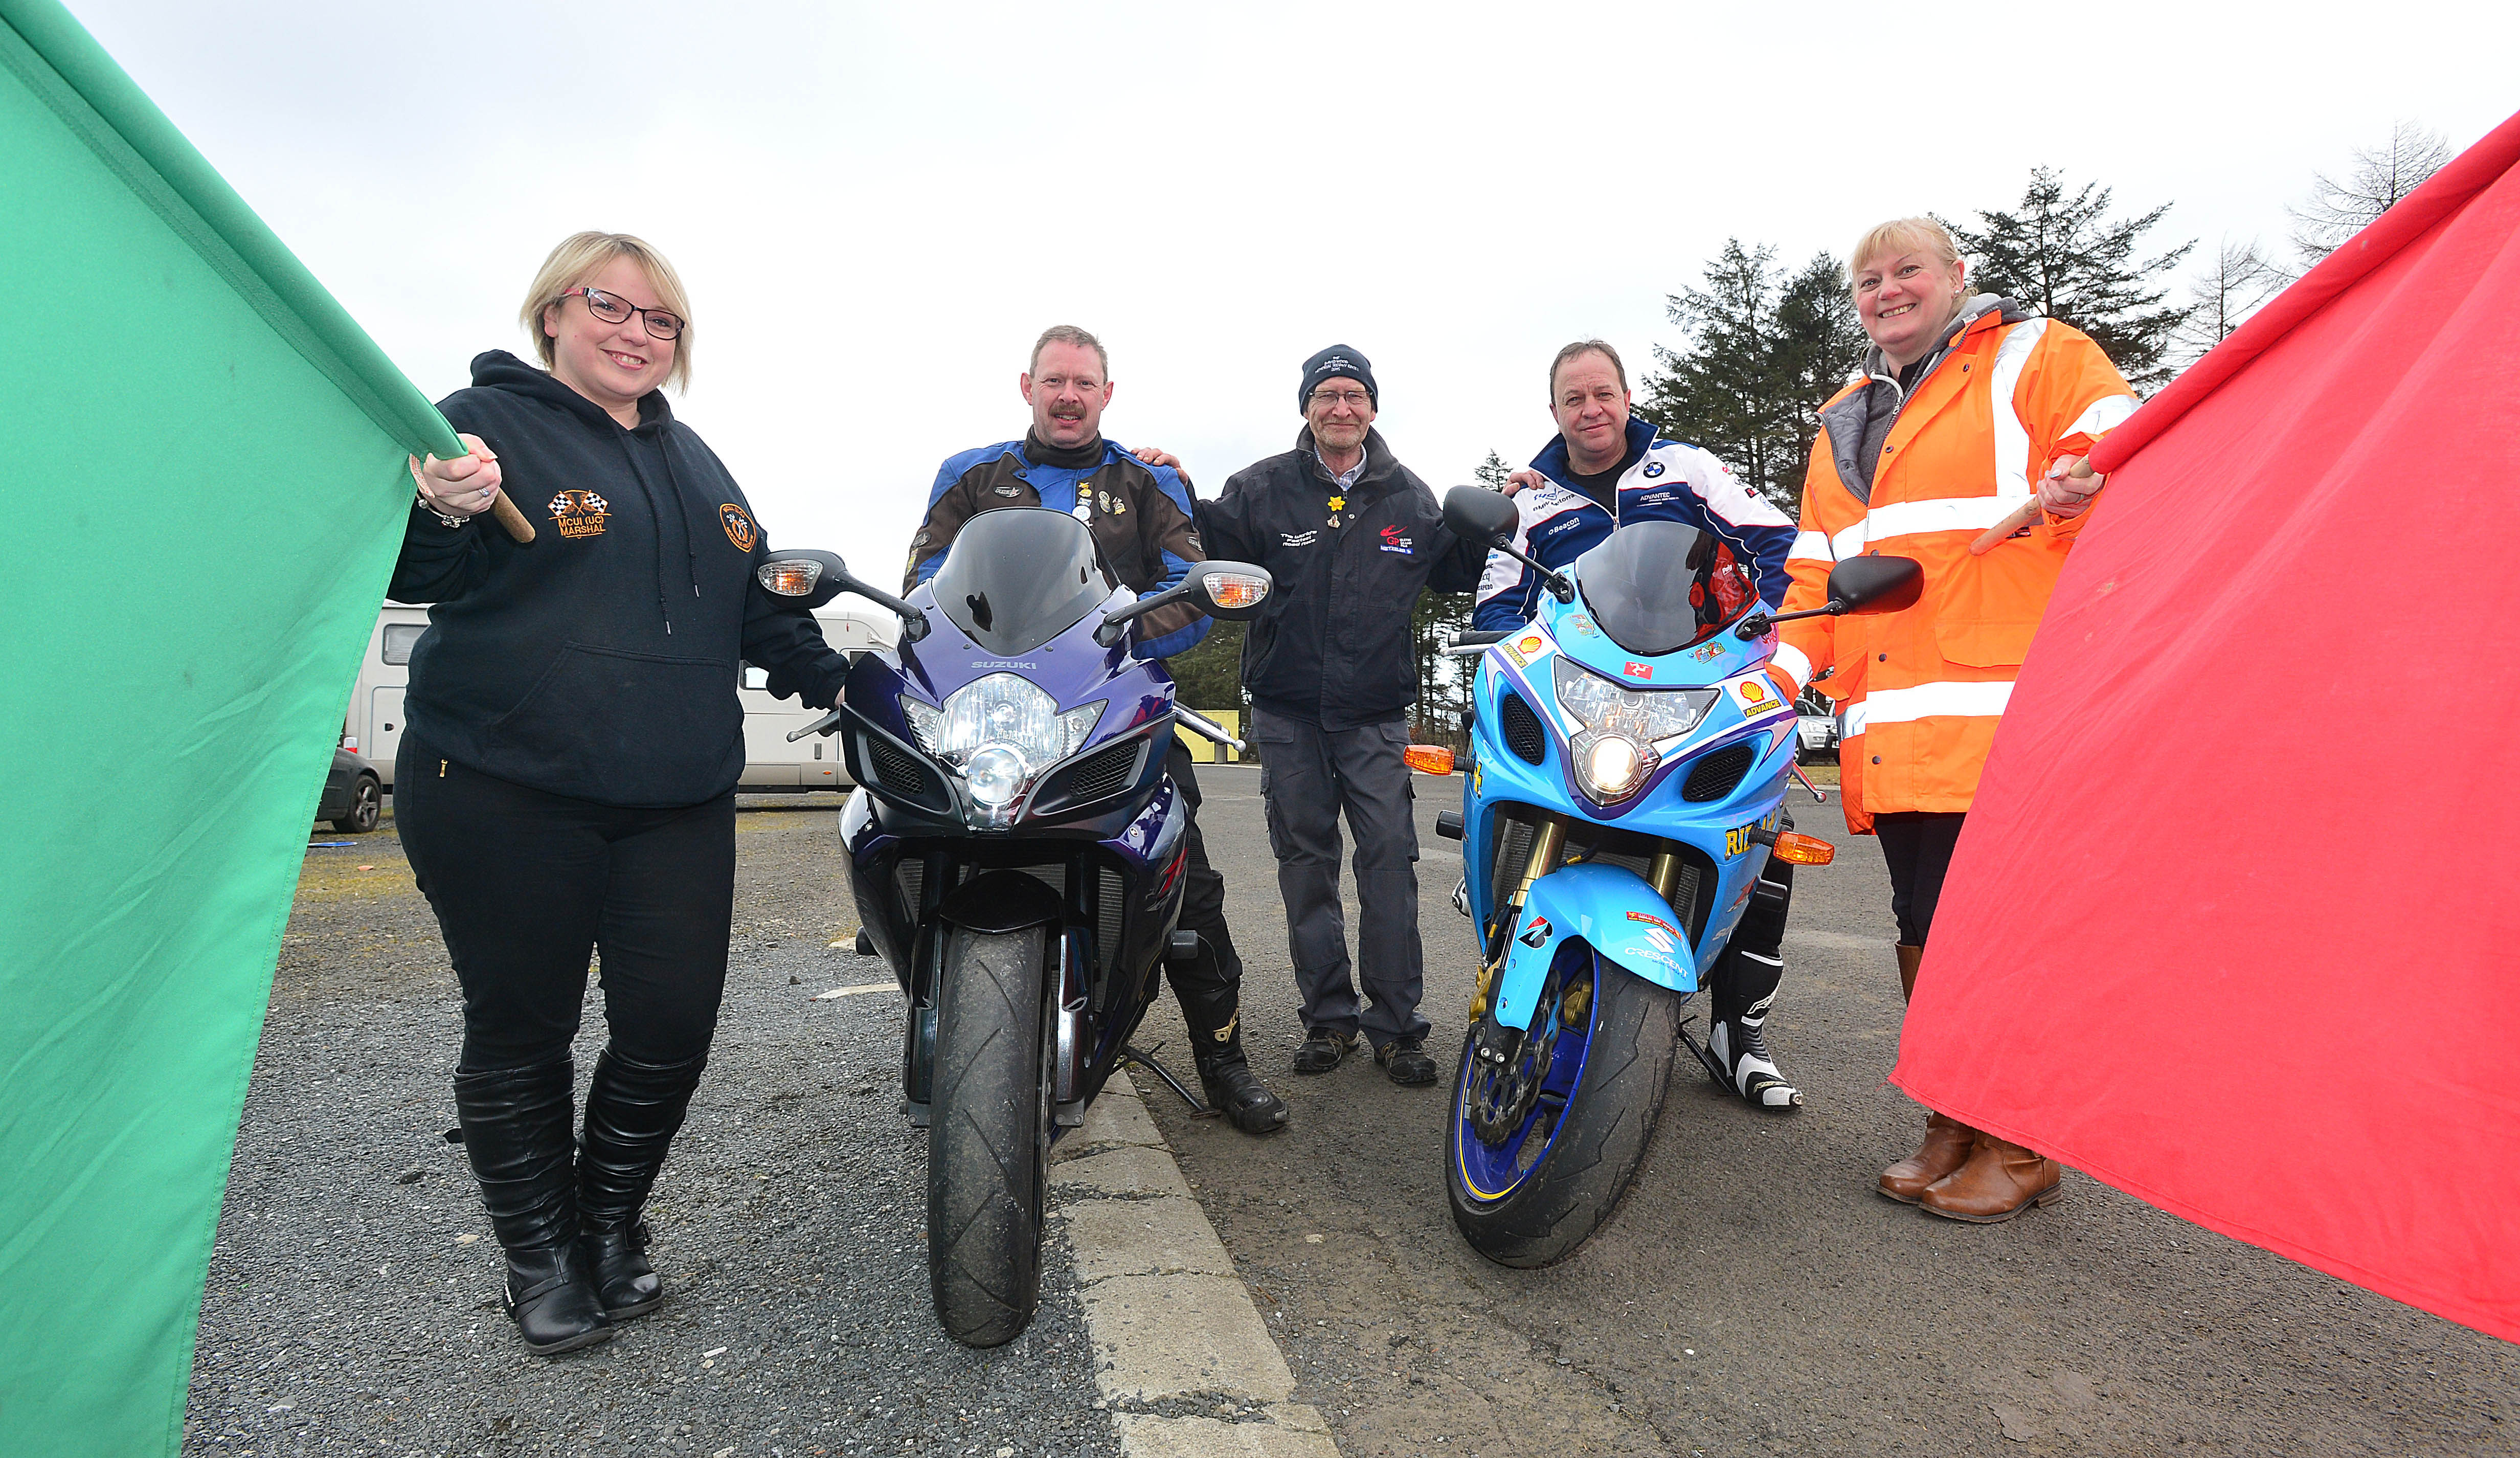 Ulster Grand Prix hosts MCUI training for 102 event marshals and officials